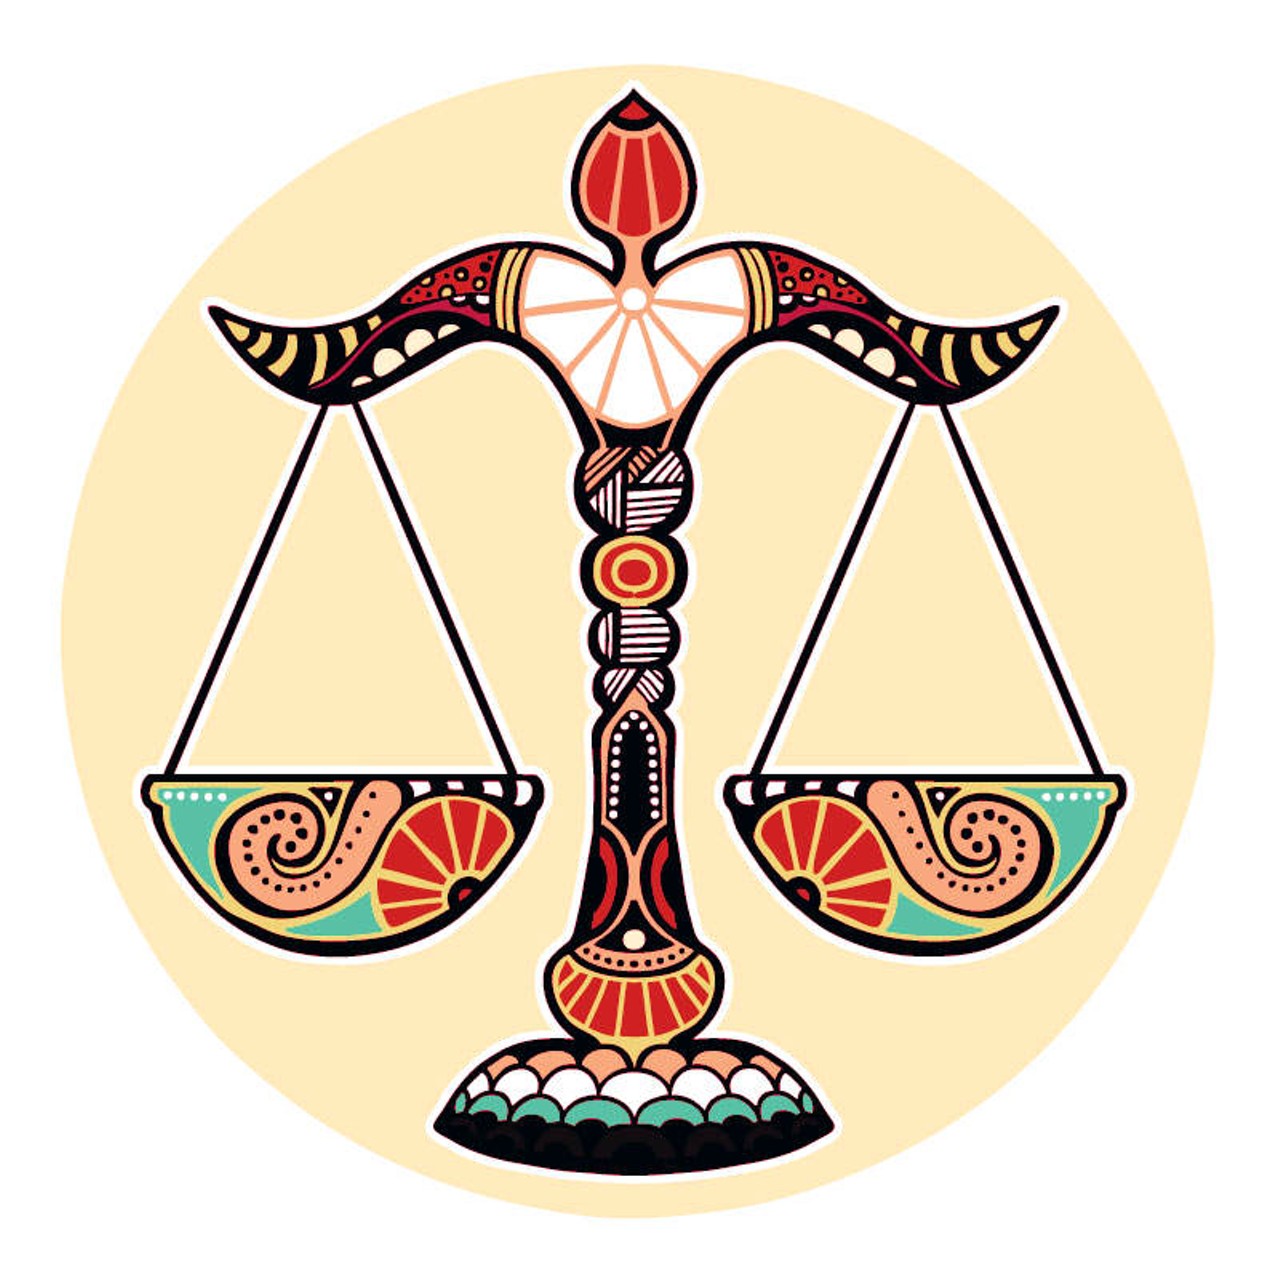 LIBRA (Sept. 21-Oct. 20): 
It&#146;s hard to know what to say to you. The Libra frequency is either 100% truthful, or hiding behind a wall of denial that no one can scale. Those of you who have no problem with the reality of your situation are riding high on a wave of self-discovery and jubilance. If that is the case, use this time to keep getting closer to your purpose. Those of you who have a hard time facing both the music and yourself would do well to haul back and look at the ways in which you are using spiritual or philosophical principles to turn a blind eye to whatever you refuse to confront.